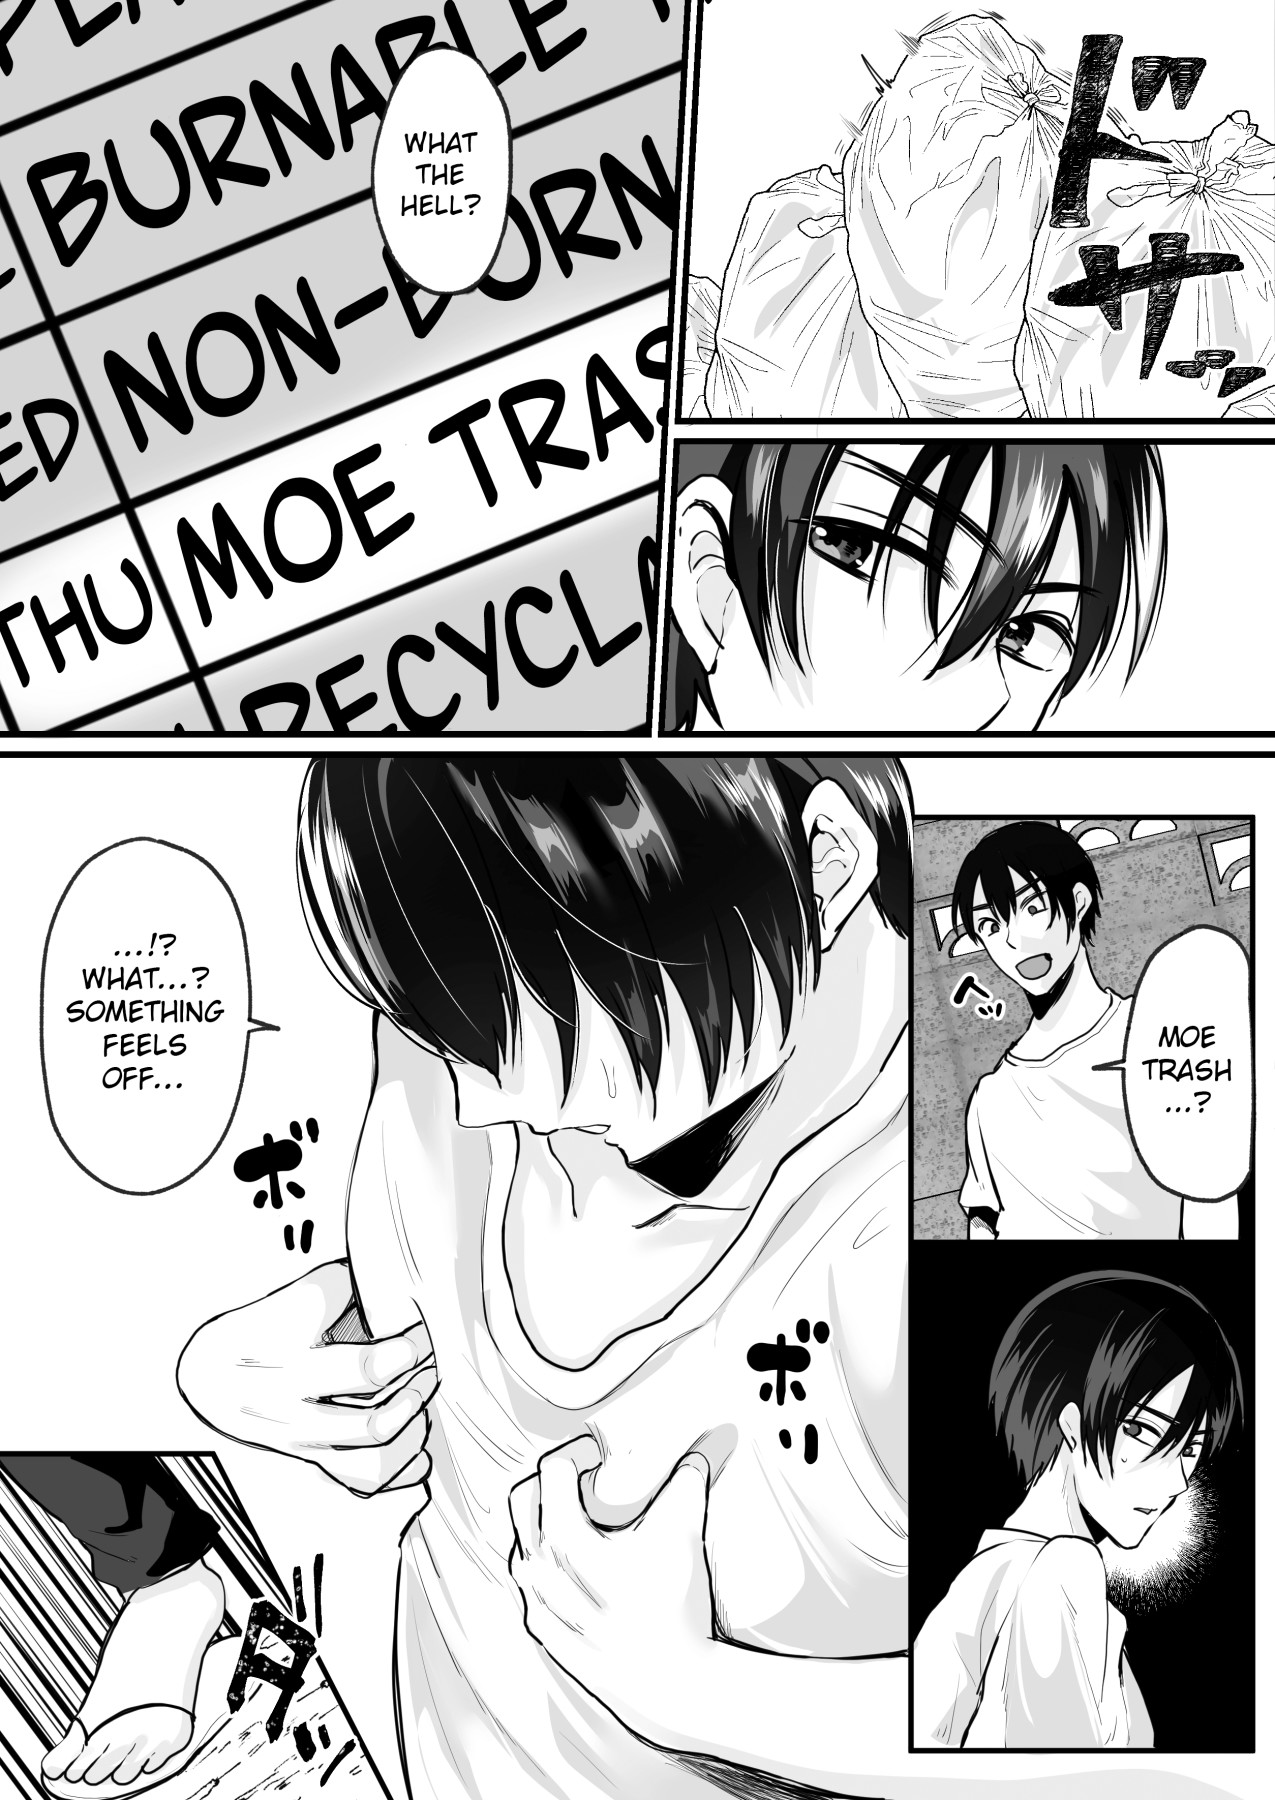 Hentai Manga Comic-The Terrifying Moe Trash Sign That Changes Your Sex Just From Looking At It-Read-2